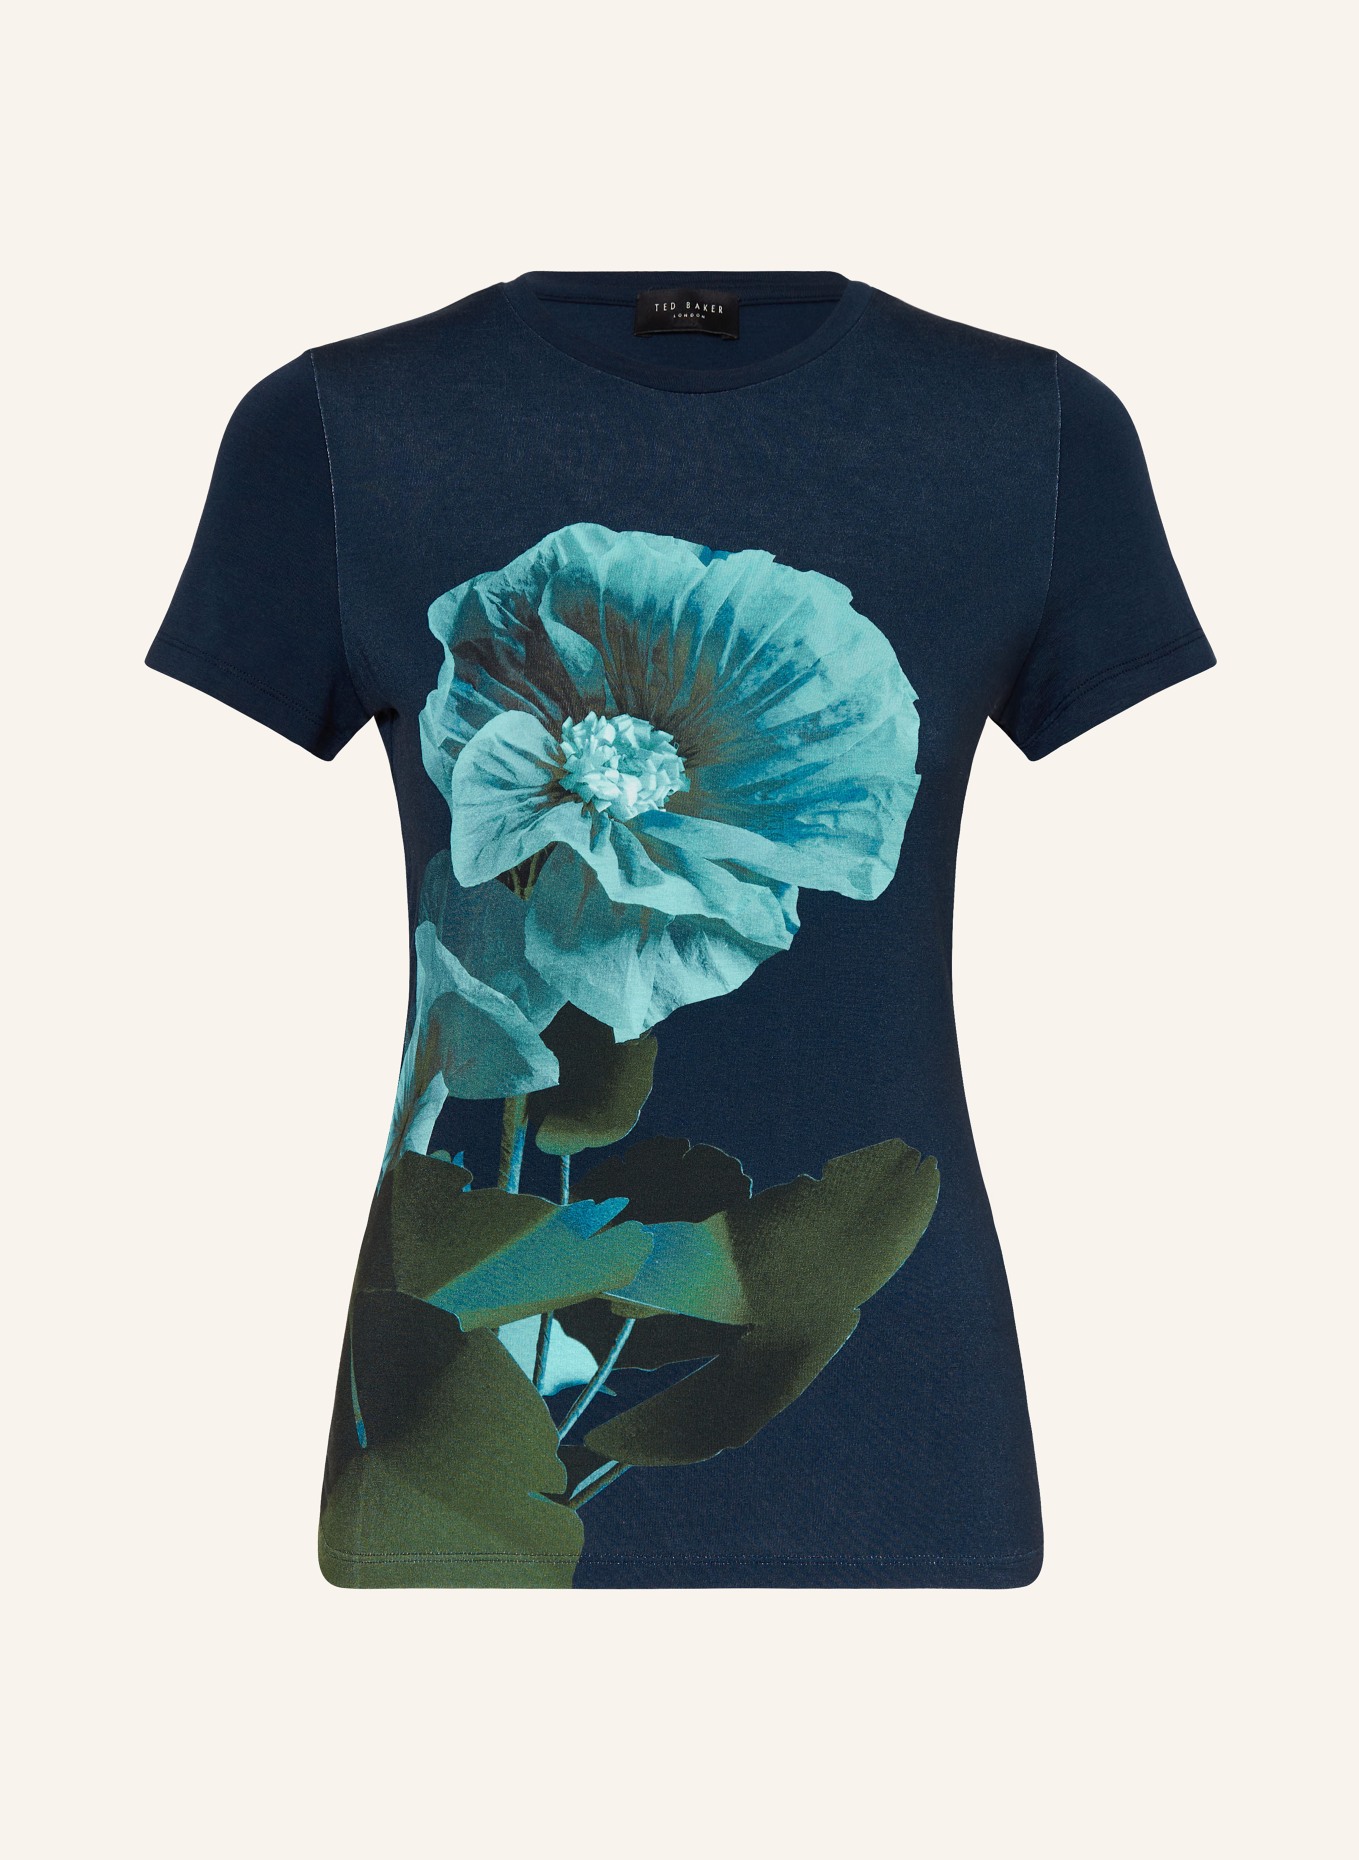 TED BAKER T-shirt MERIDI, Color: DARK BLUE/ GREEN/ TURQUOISE (Image 1)